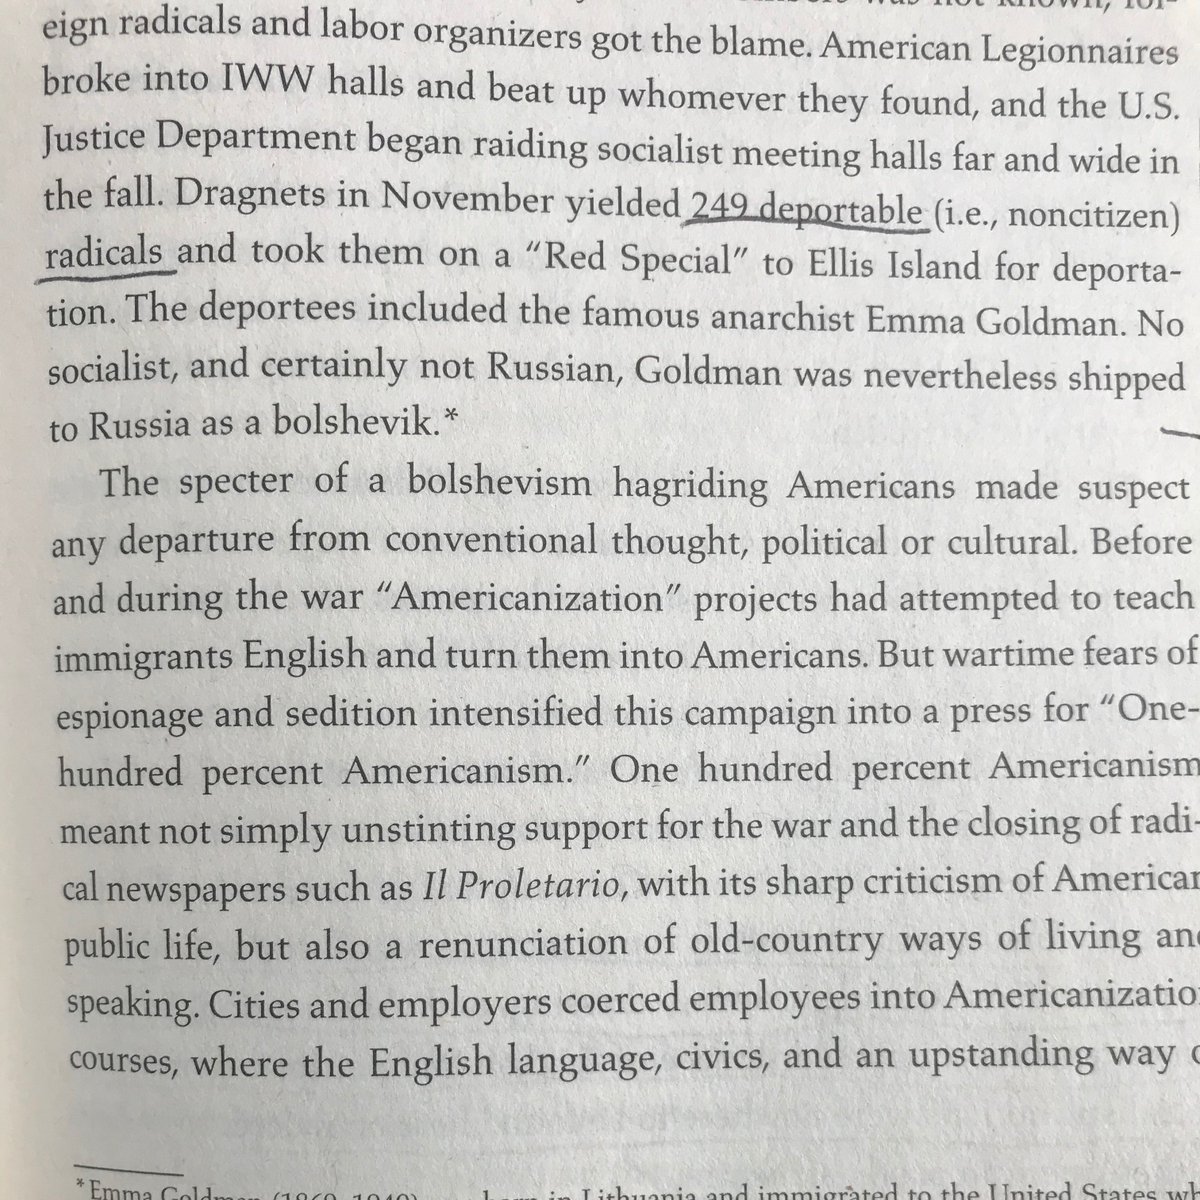 After the Civil War drew to a close, the success of demonizing "foreign agitators" was not lost on politicians tasked with suppressing the 1877 Great Railroad Strike and the labor movement of the early 20th century, both largely catalyzed by immigrants not yet considered "white."